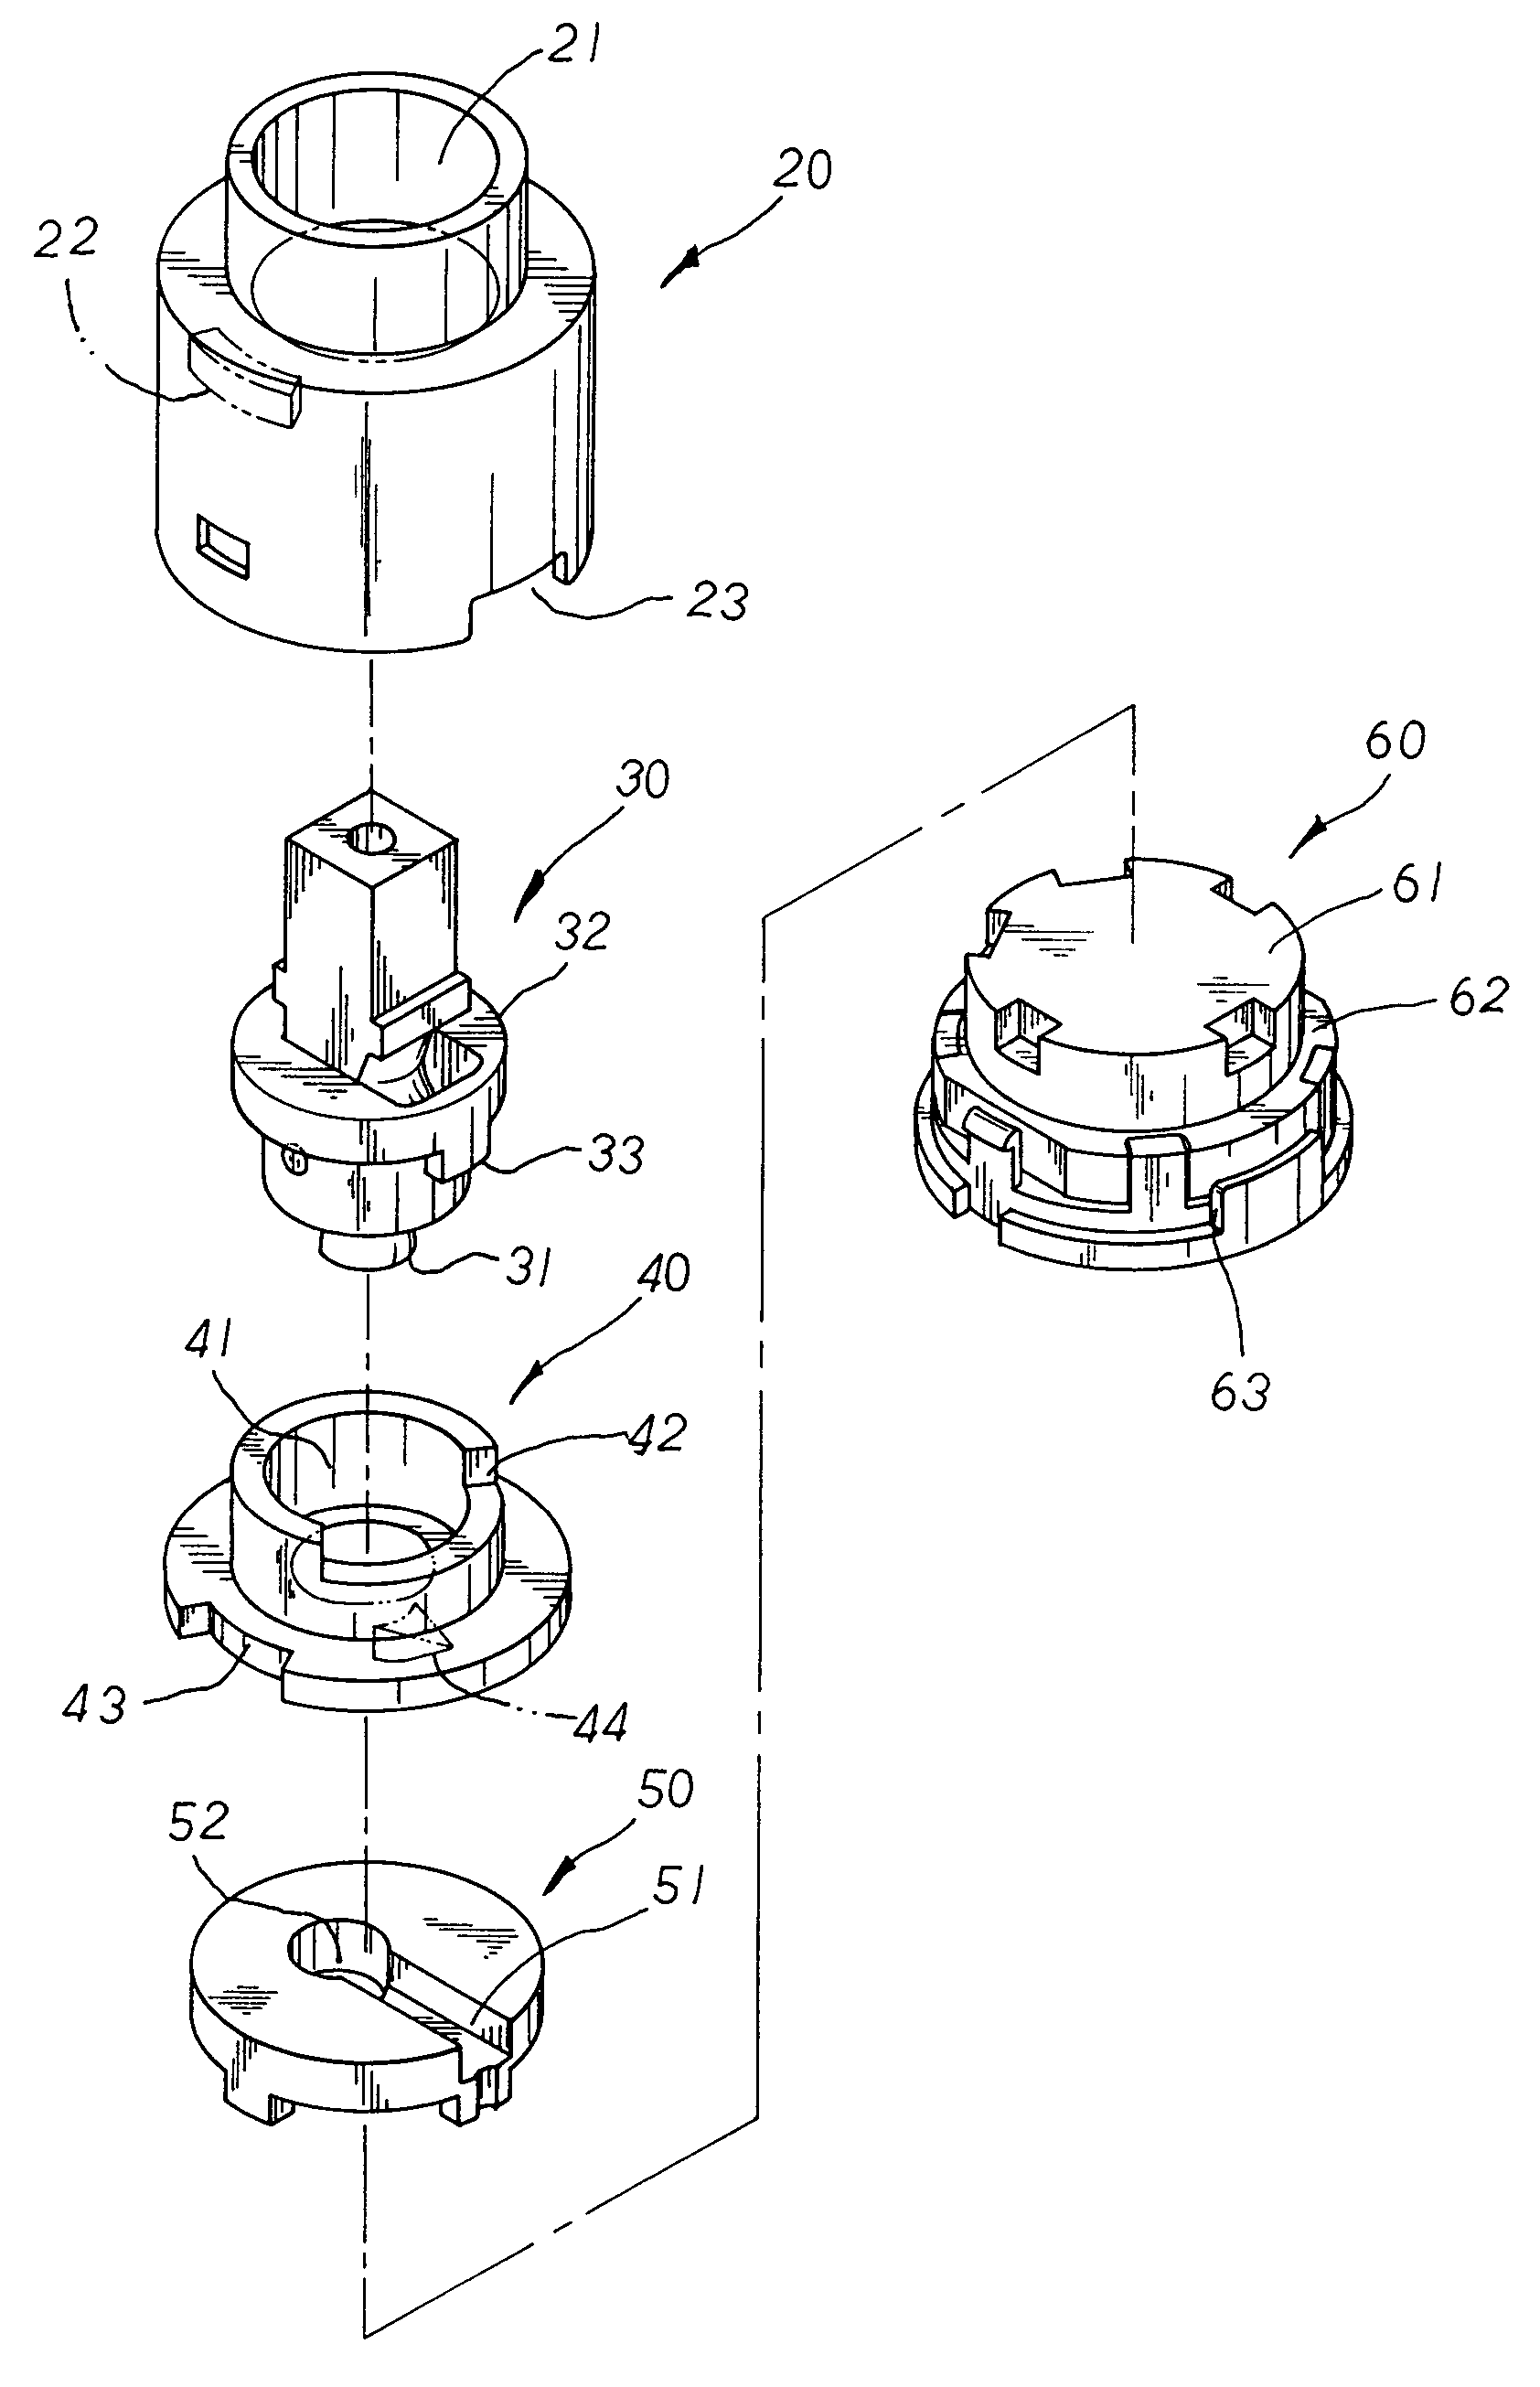 Valve core for single handled faucet